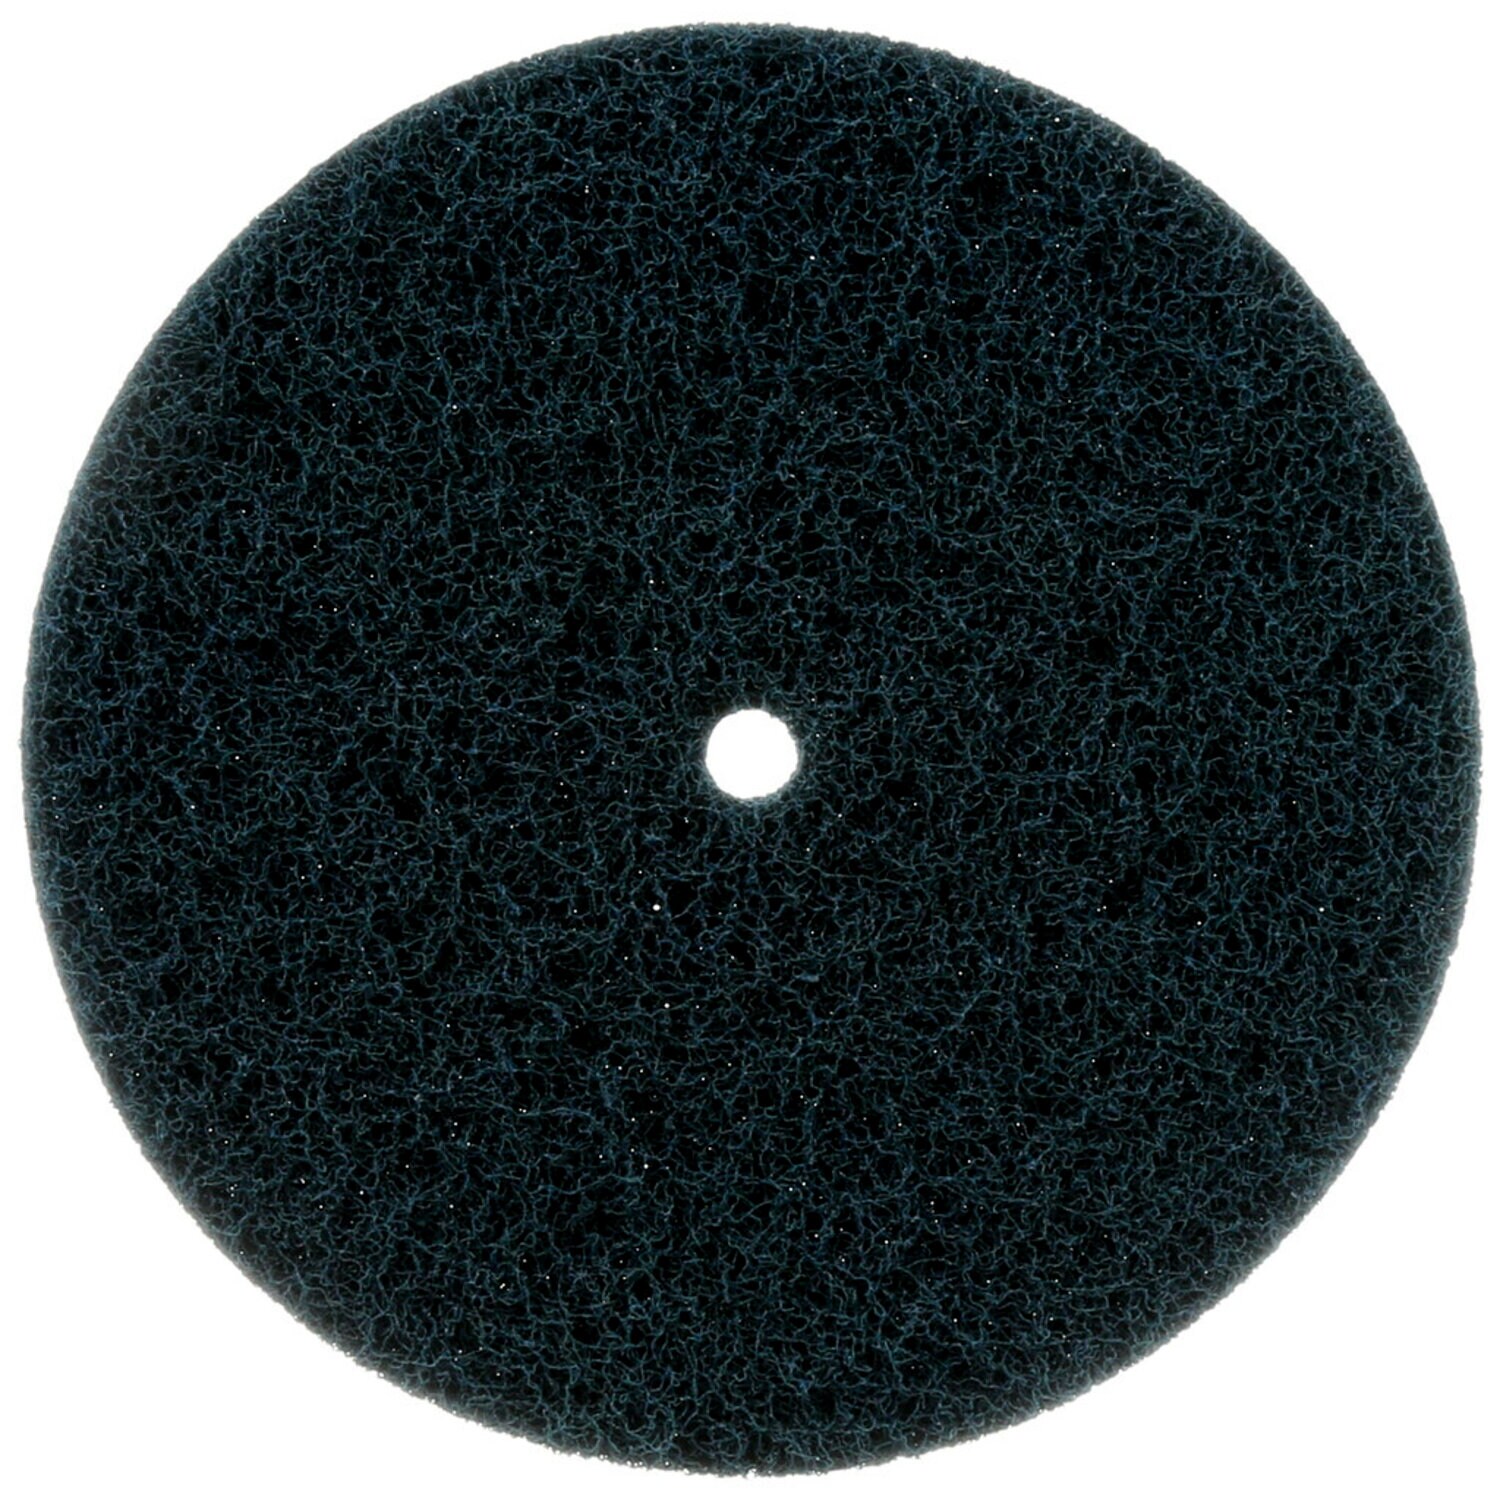 7000046750 - Standard Abrasives Buff and Blend HS Disc, 810910, 8 in x 1/2 in A MED,
10/Pac, 100 ea/Case